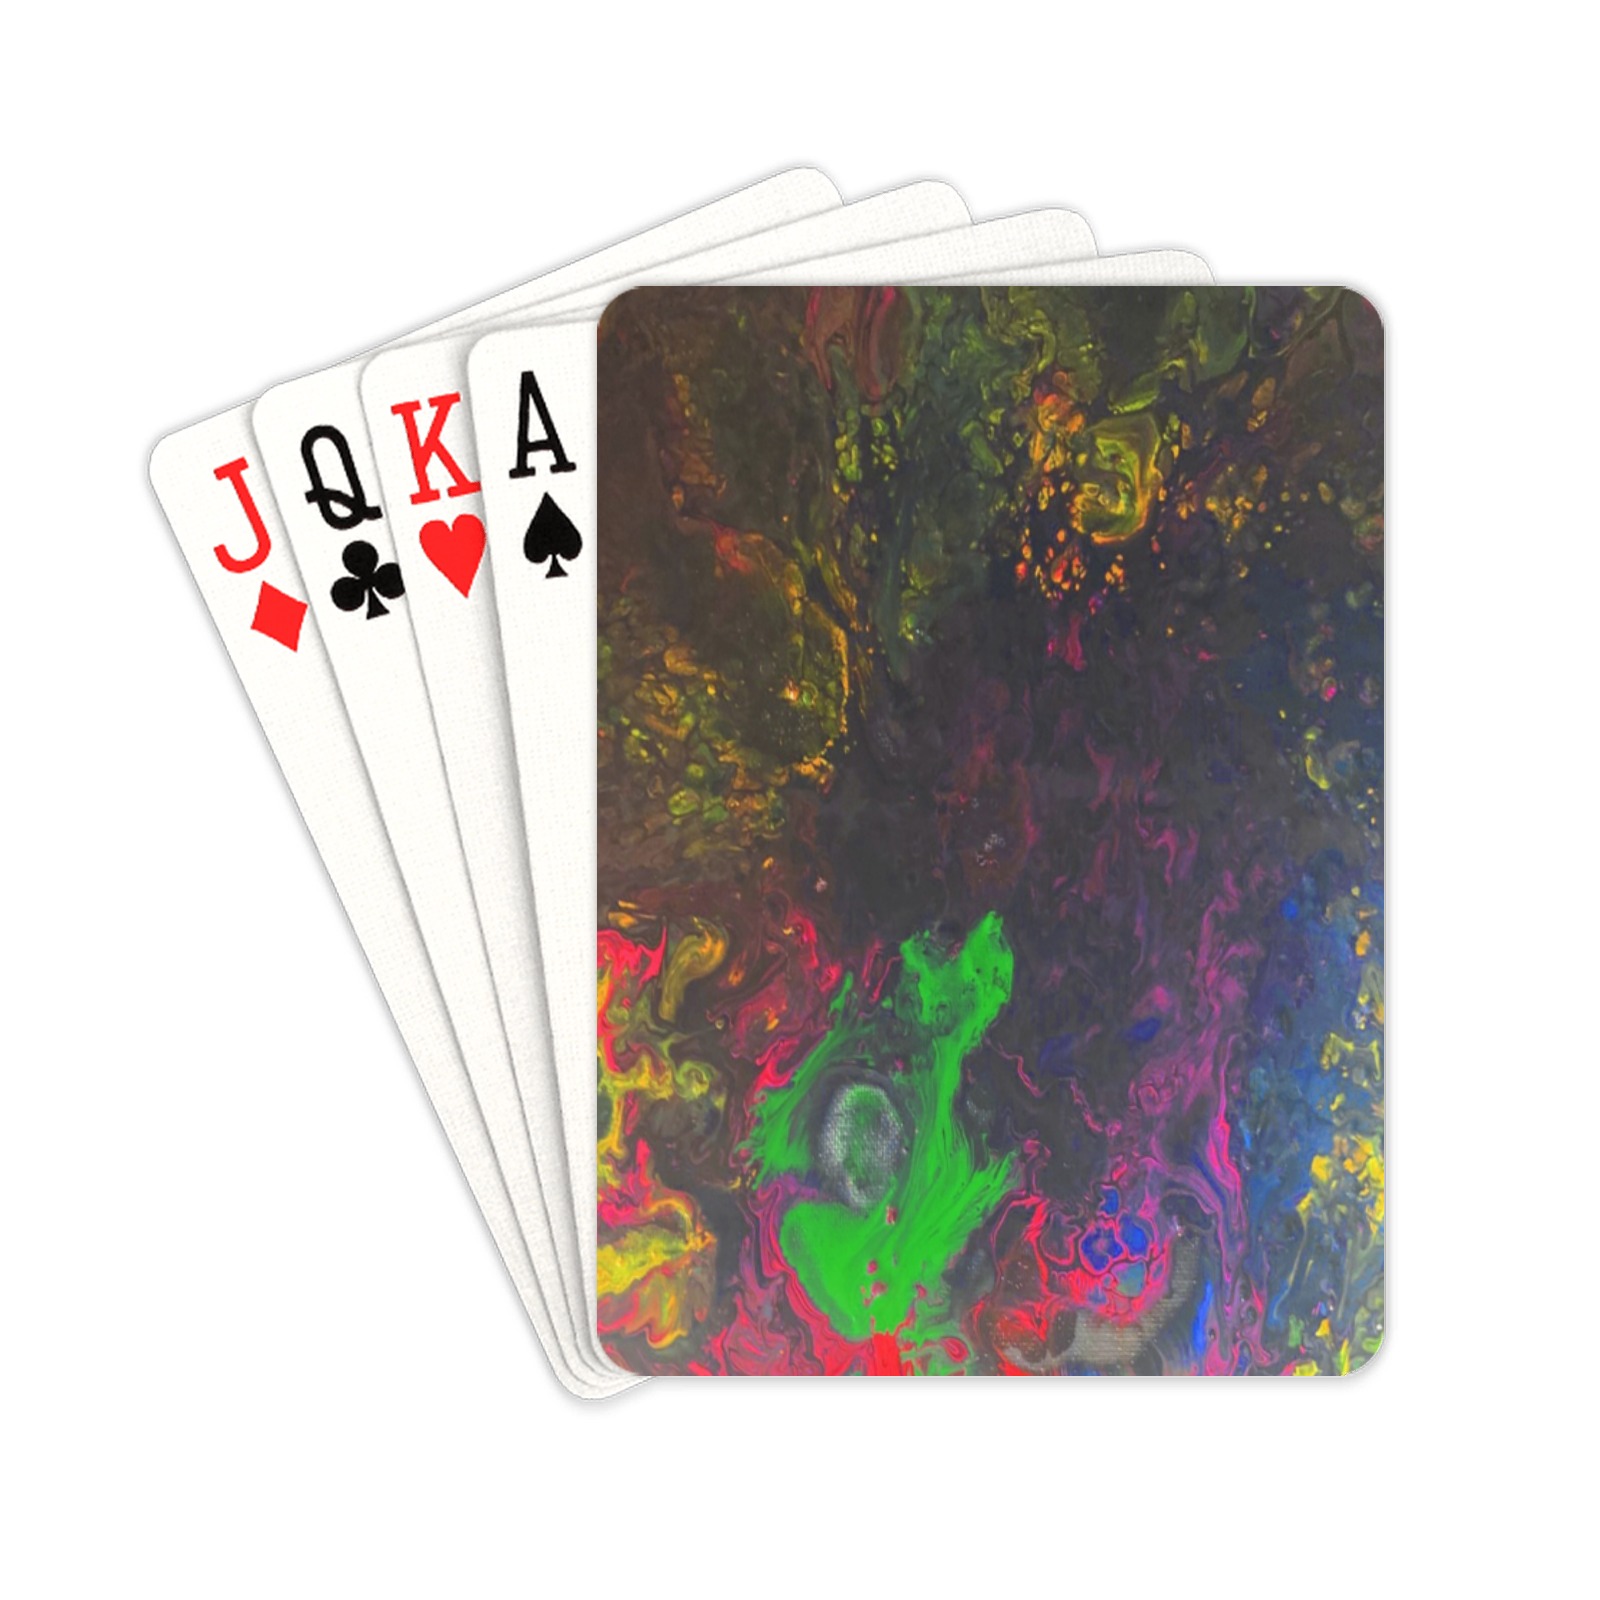 Deep in the Jungle Playing Cards 2.5"x3.5"